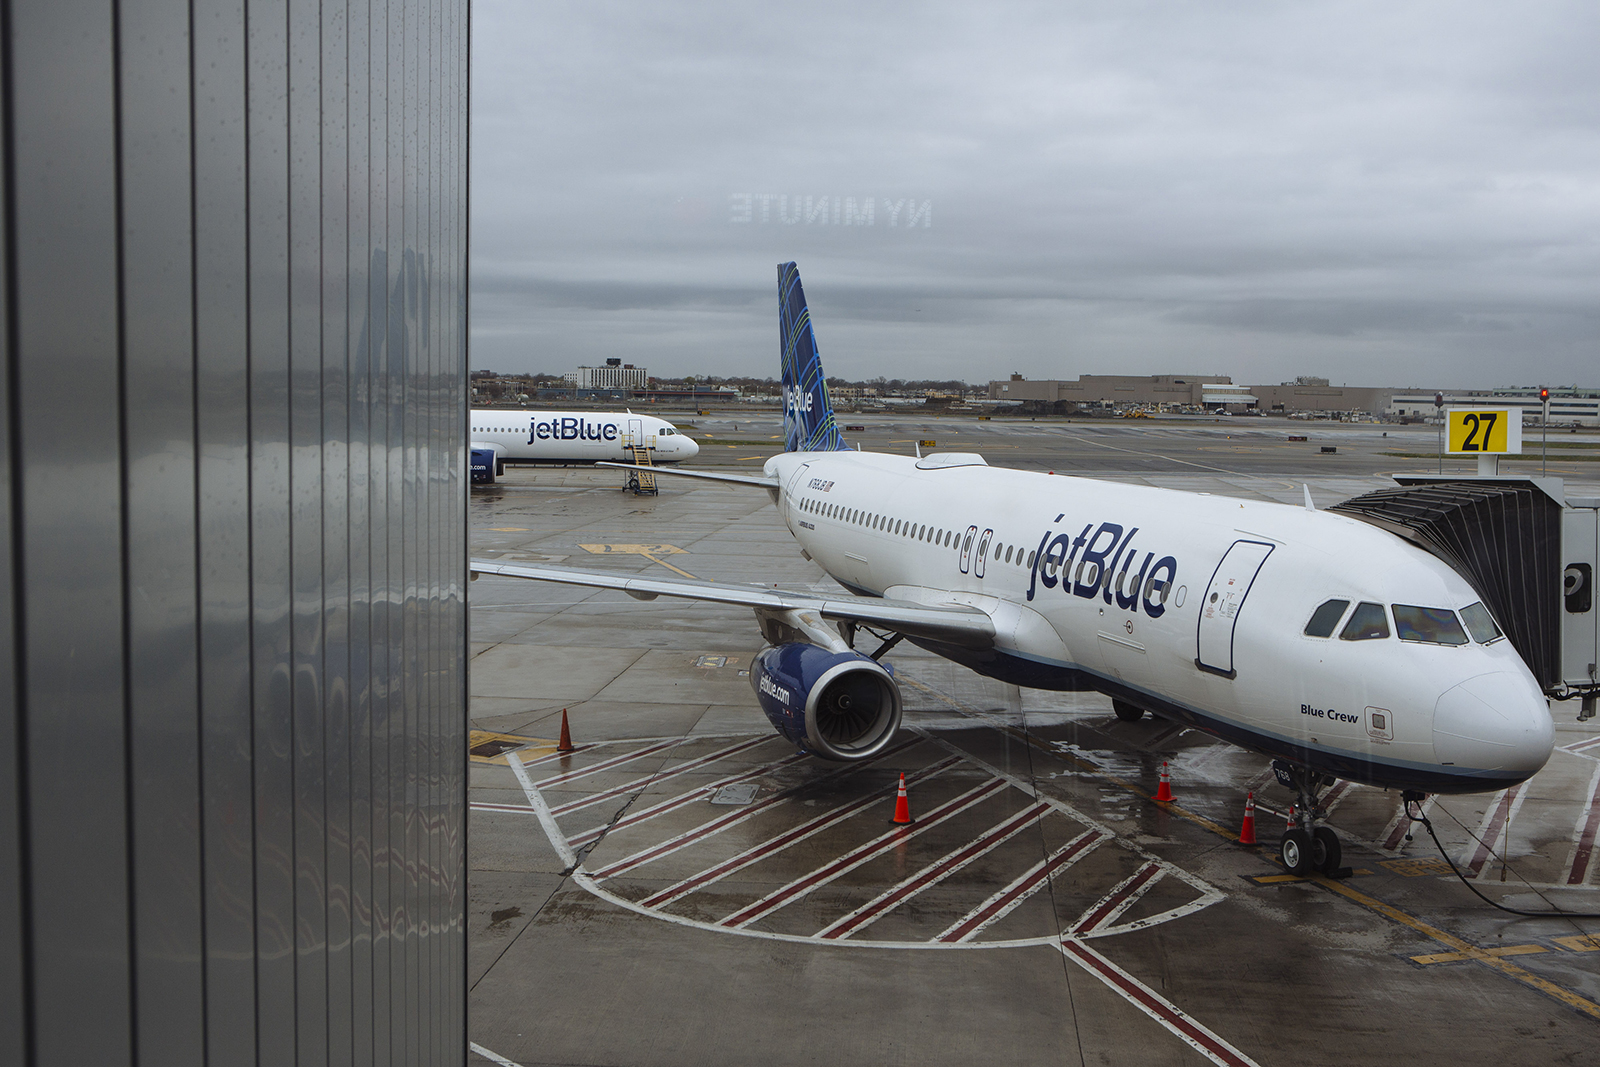 A JetBlue Airways Corp. aircraft sits at a gate in Terminal 5 at John F. Kennedy International Airport (JFK) in New York on April 9.